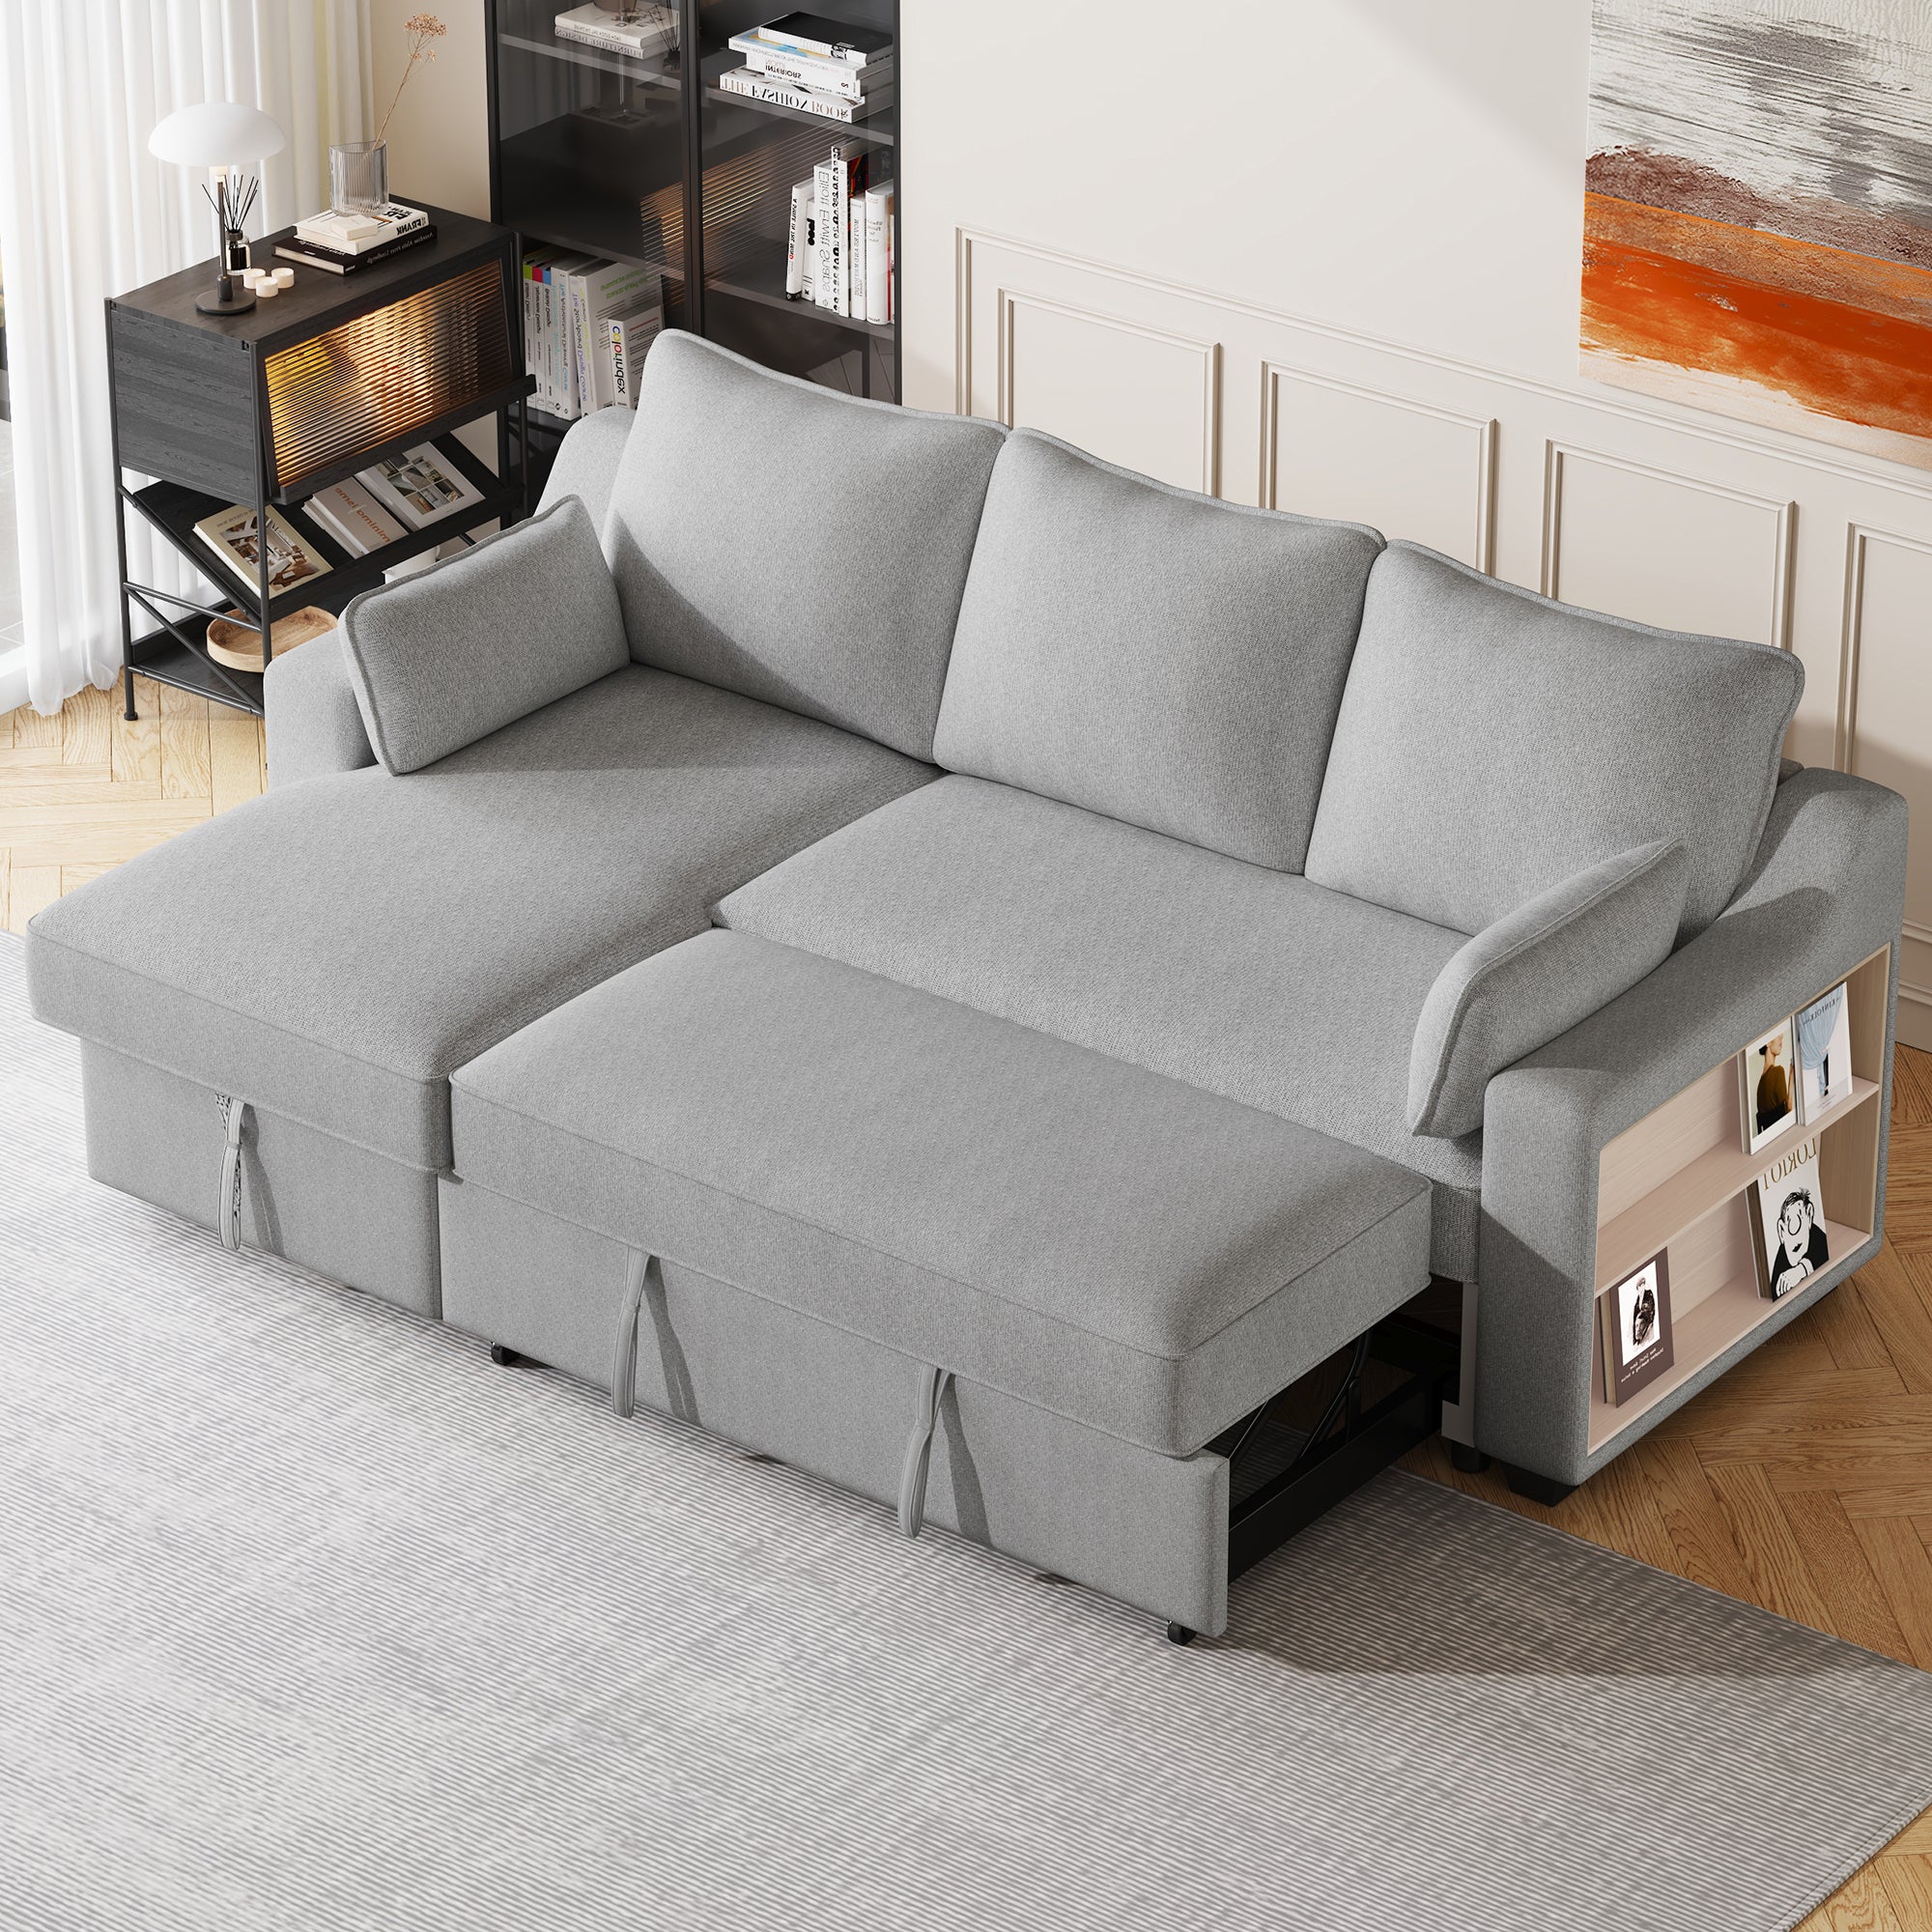 90" L-Shaped Sleeper Sofa w/ Storage Chaise, Racks & USB - Light Grey-Sleeper Sectionals-American Furniture Outlet